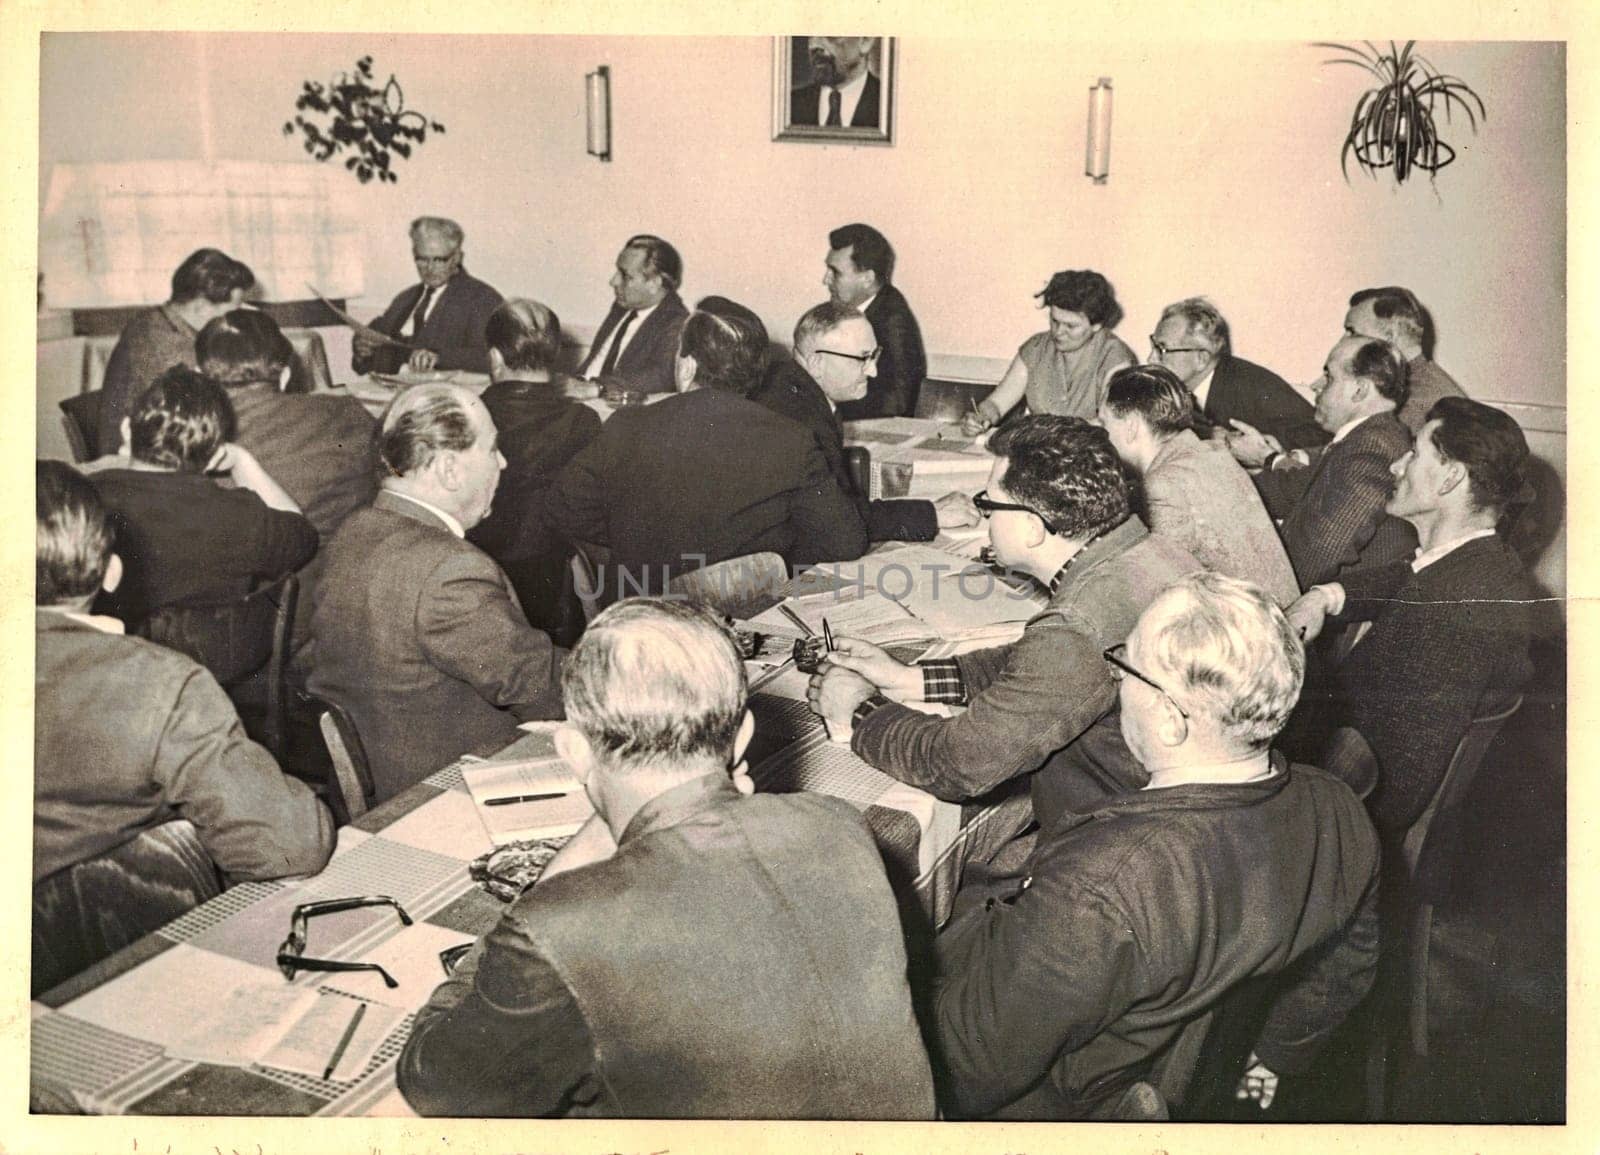 FRAUREUTH, EAST GERMANY - MAY 6, 1965: The retro photo shows company meeting in Communist bloc. Former East Germany, 1960s.